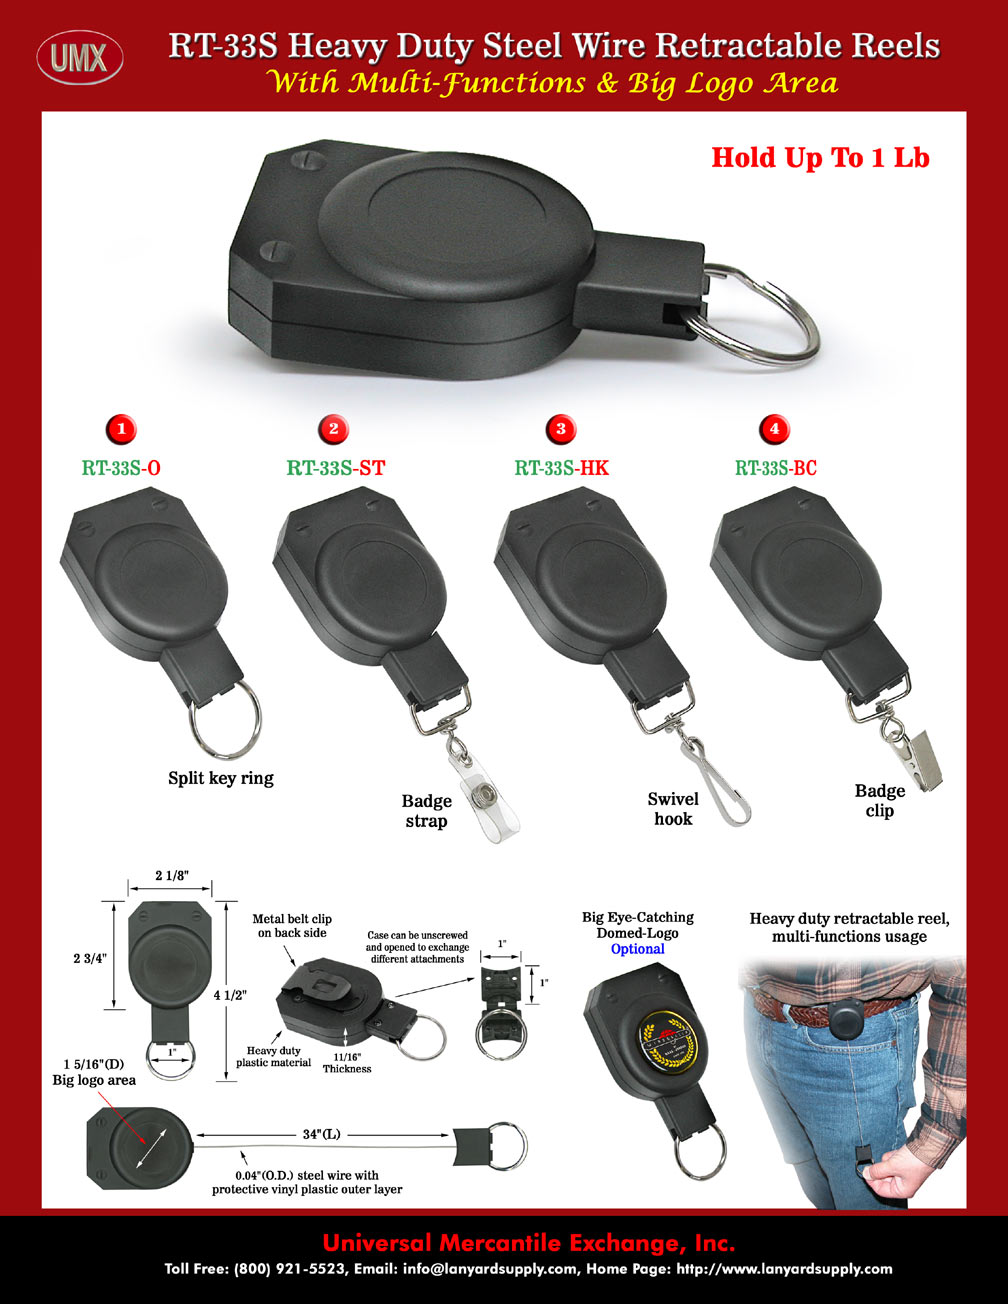 Heavy Duty Durable Retractable Reels with Belt Clips and Multiple Attachments